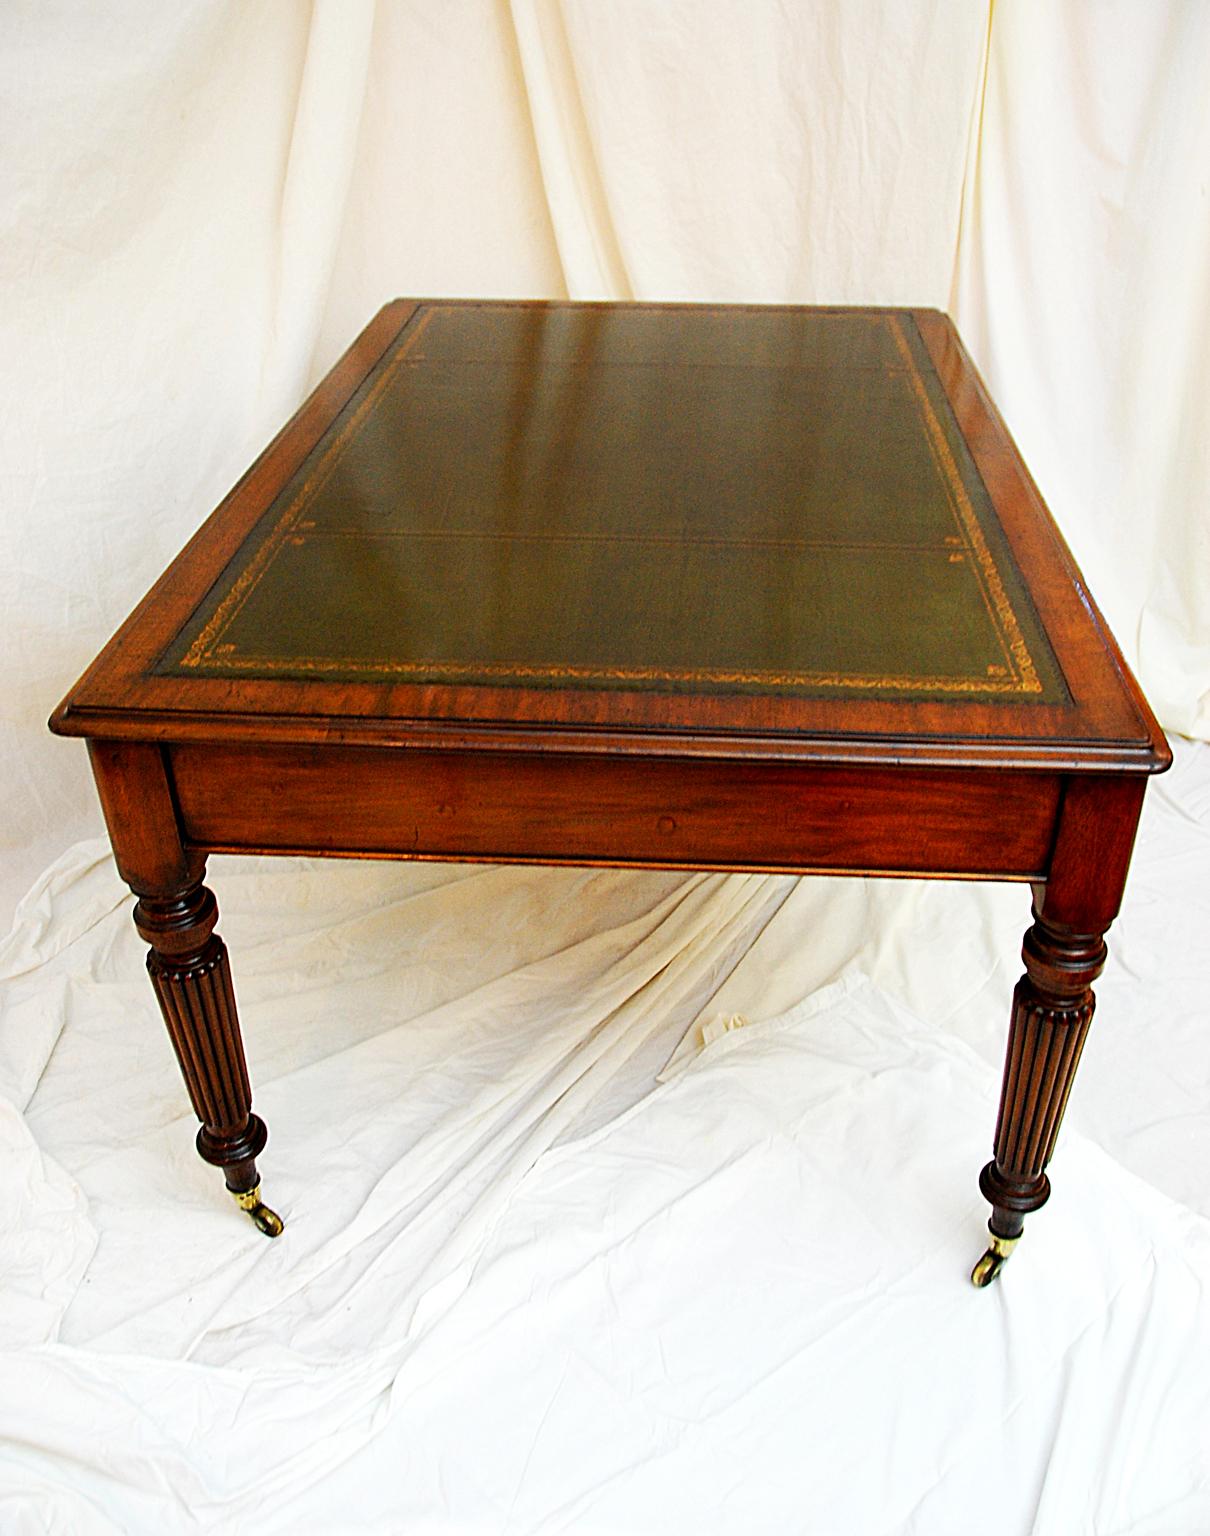 English 19th century partners writing table in mahogany with six drawers. This five foot by forty inch writing table is impressive in size and quality. The beautiful turned, tapered and reeded legs are in perfect proportions for a desk this size.